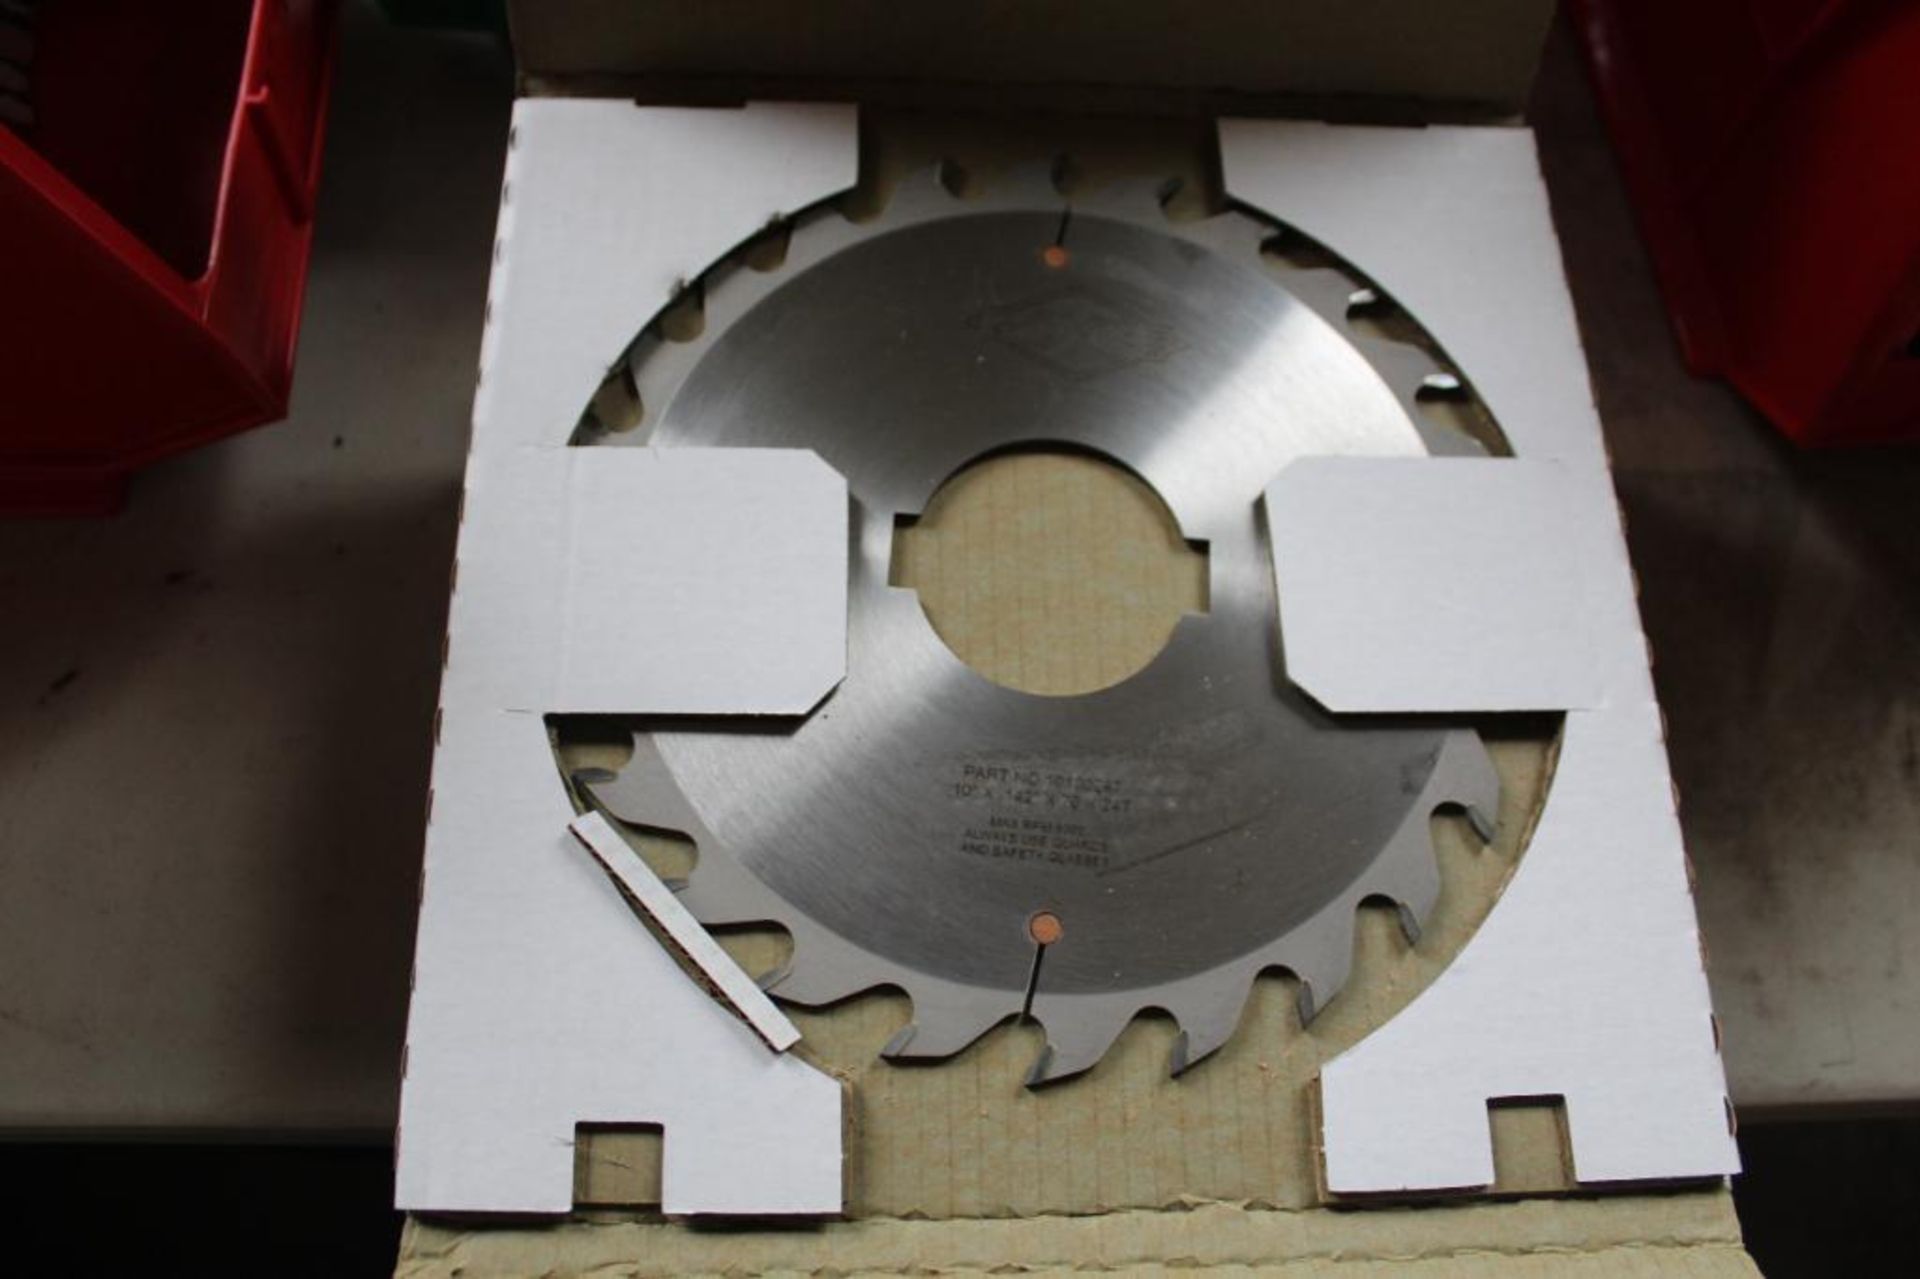 Lot of (9) Royce Ayr, 10100247, Standard Rip Saw Blades - Image 3 of 3